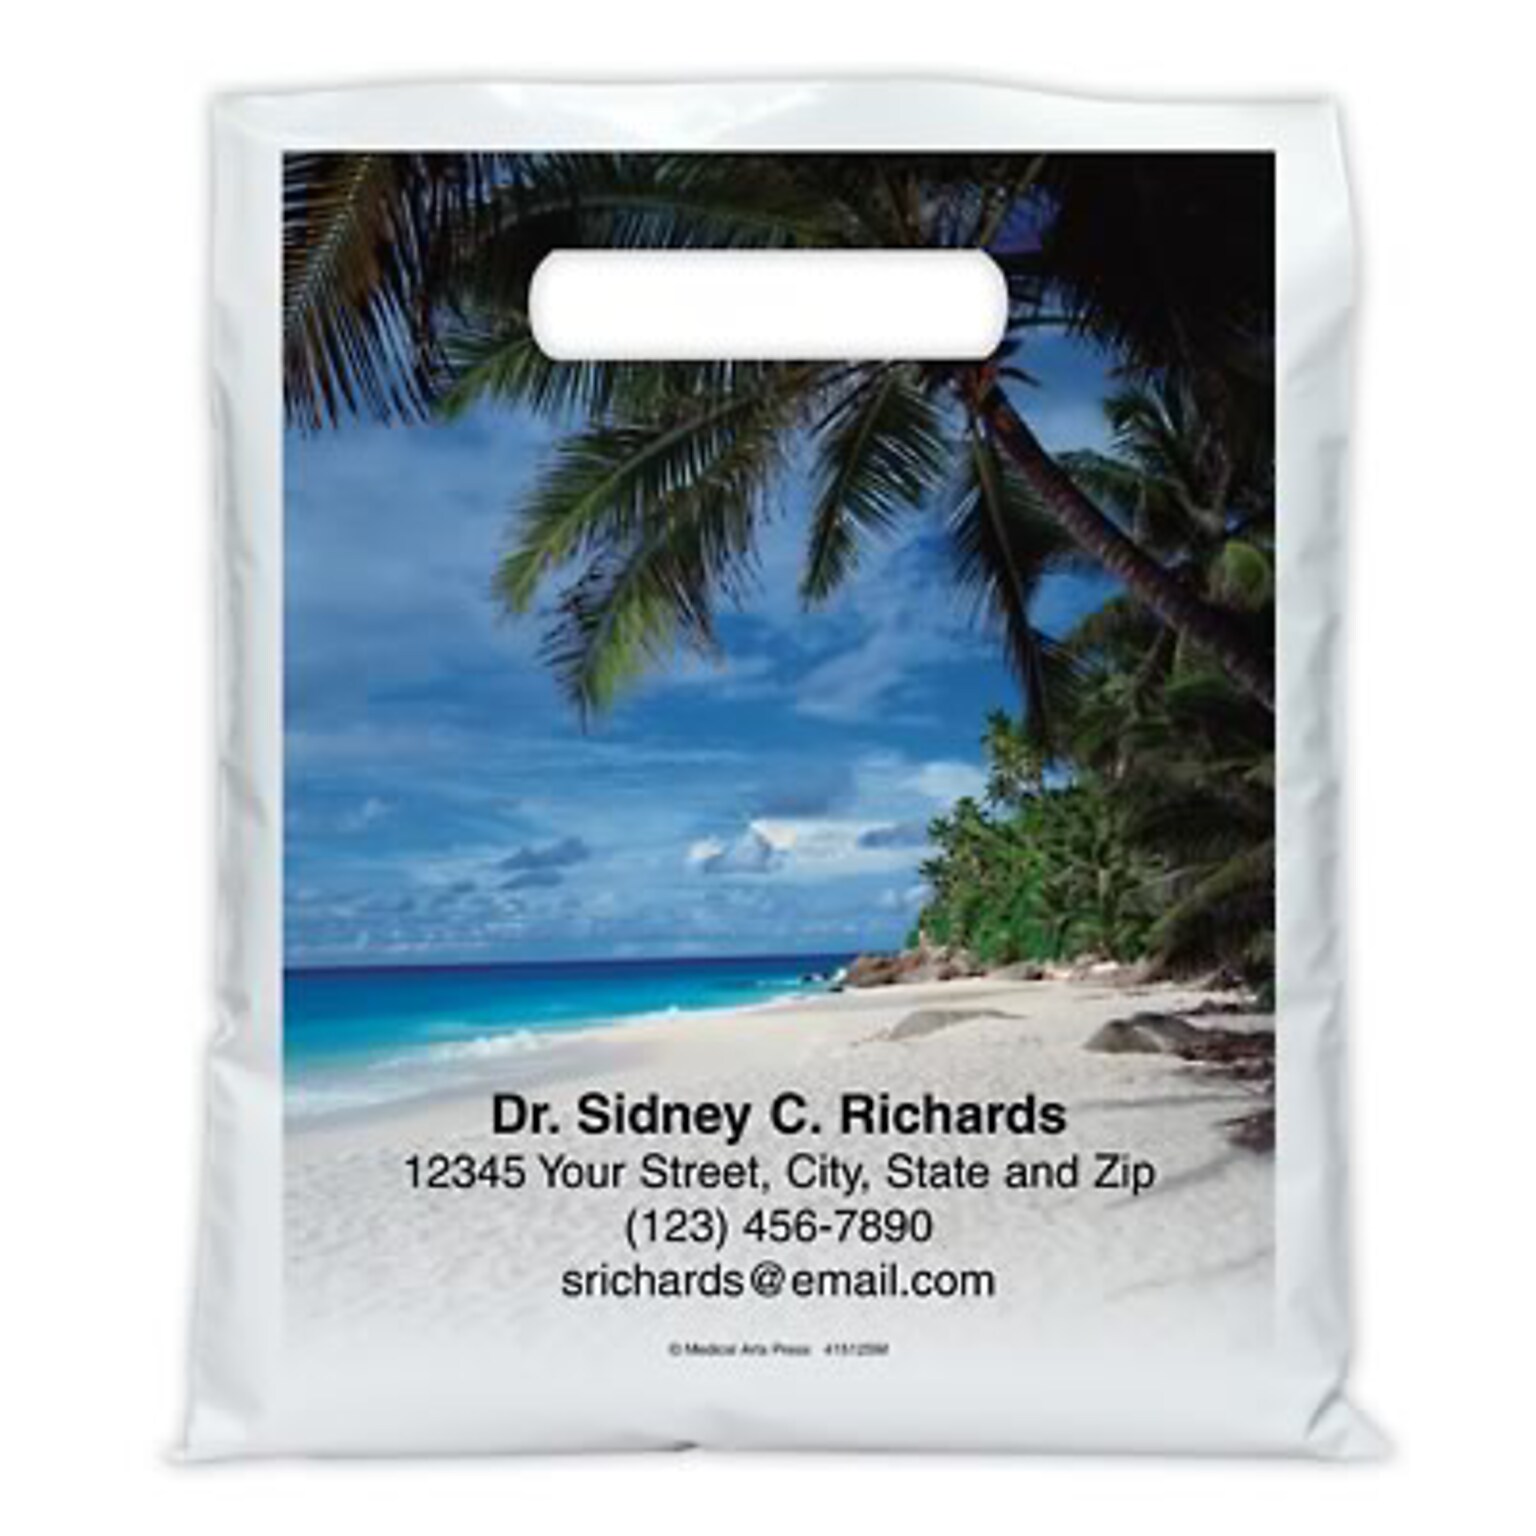 Medical Arts Press® Dental Personalized Full Color Bags; 7-1/2x9, Palm Leaf, 100 Bags, (41512)